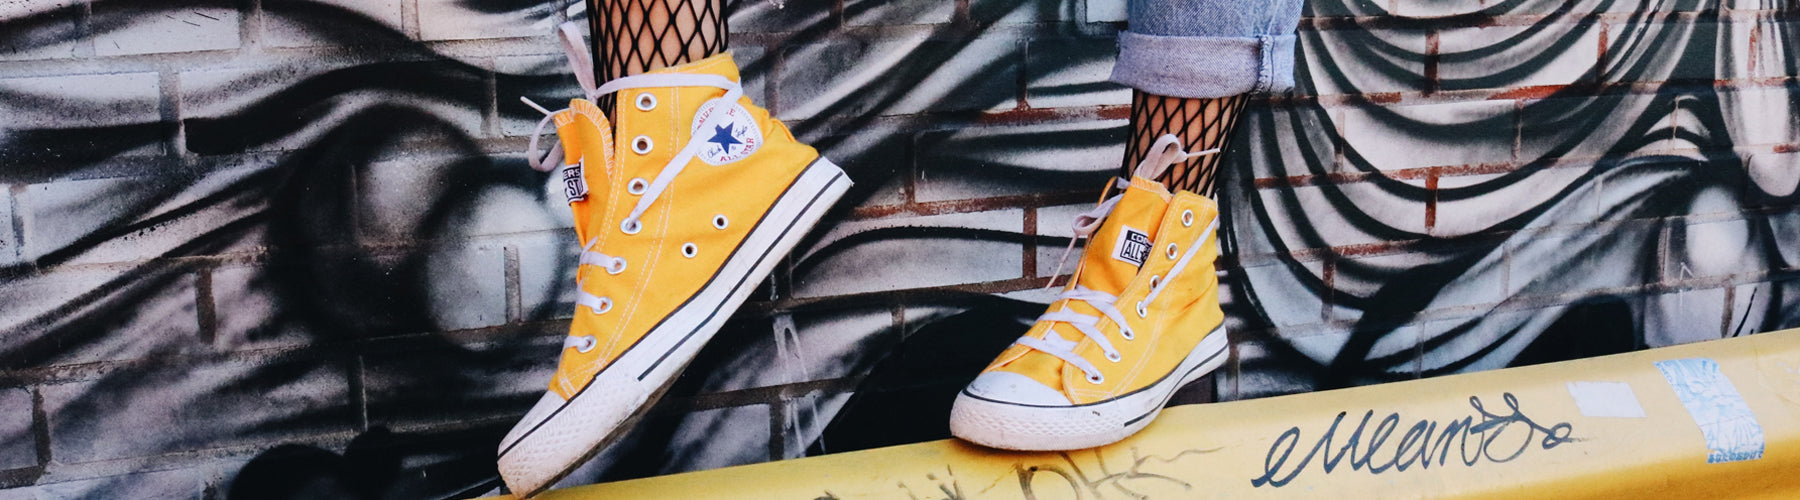 Converse Shoes for FAQ Page: photo by: Danny G on Unsplash